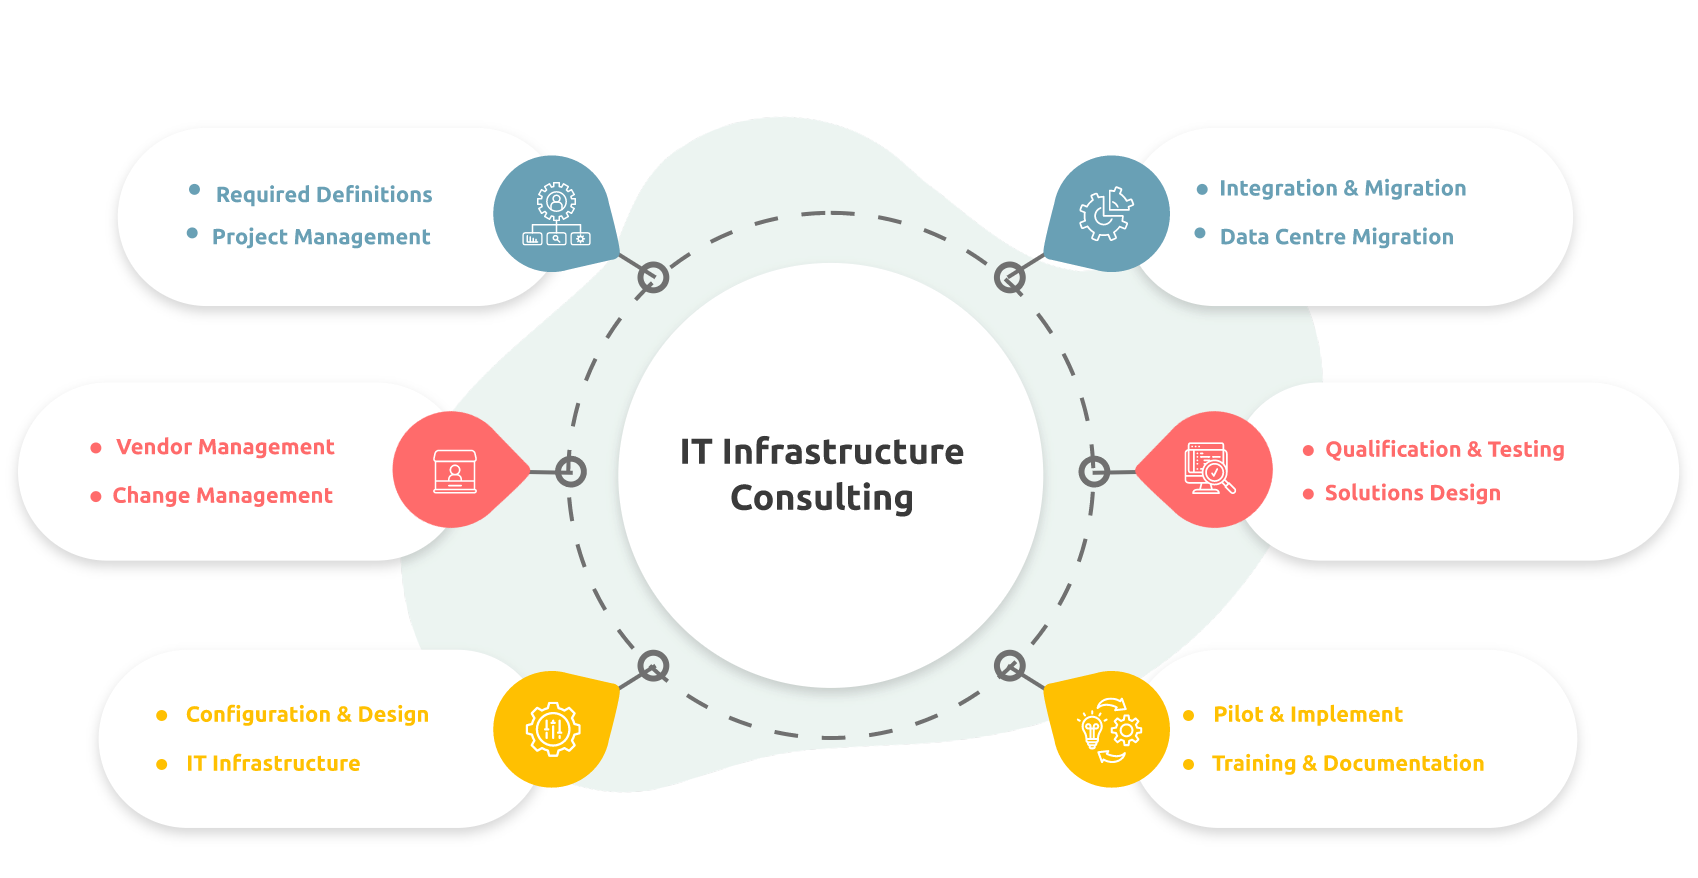 IT Infrastructure Consulting illustrated: Expert guidance for technology decision-making, optimization, and implementation.